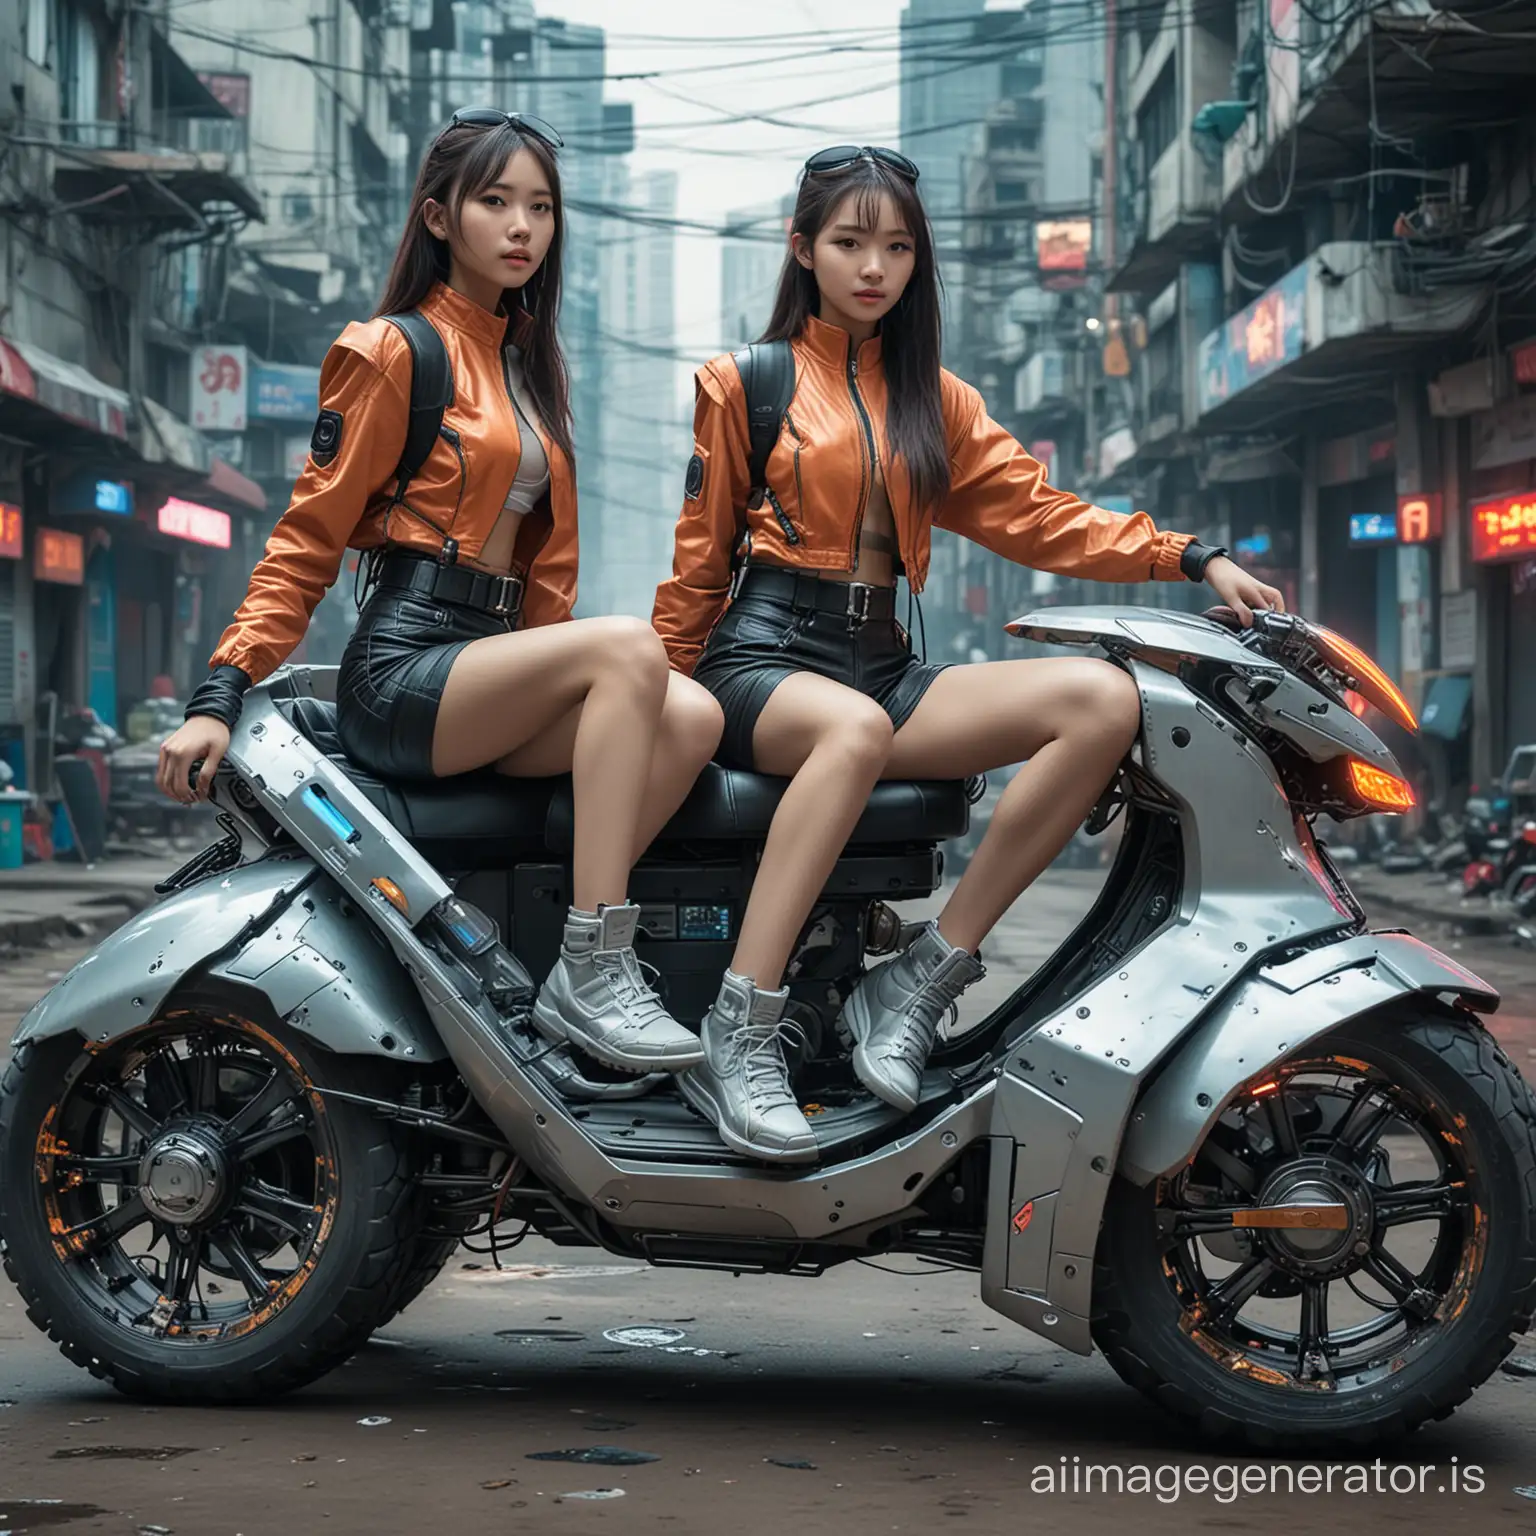 16 years old vietnamese twin sisters are riding a futuristic vehicle in cyberpunk world outdoor